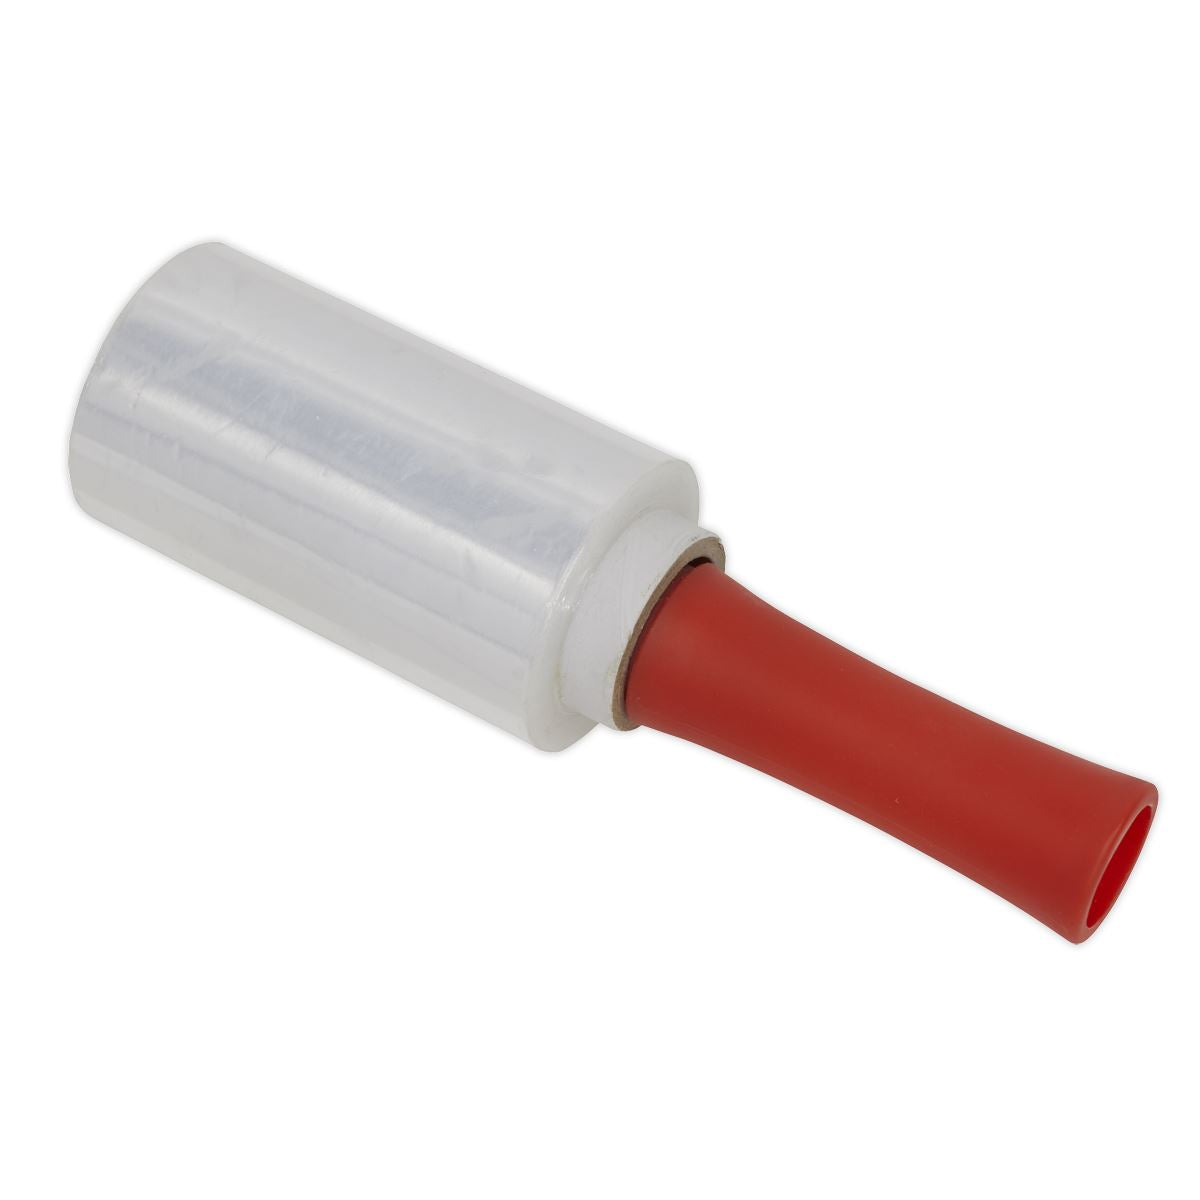 Sealey Steering Wheel Protection Film 150m with Applicator Handle